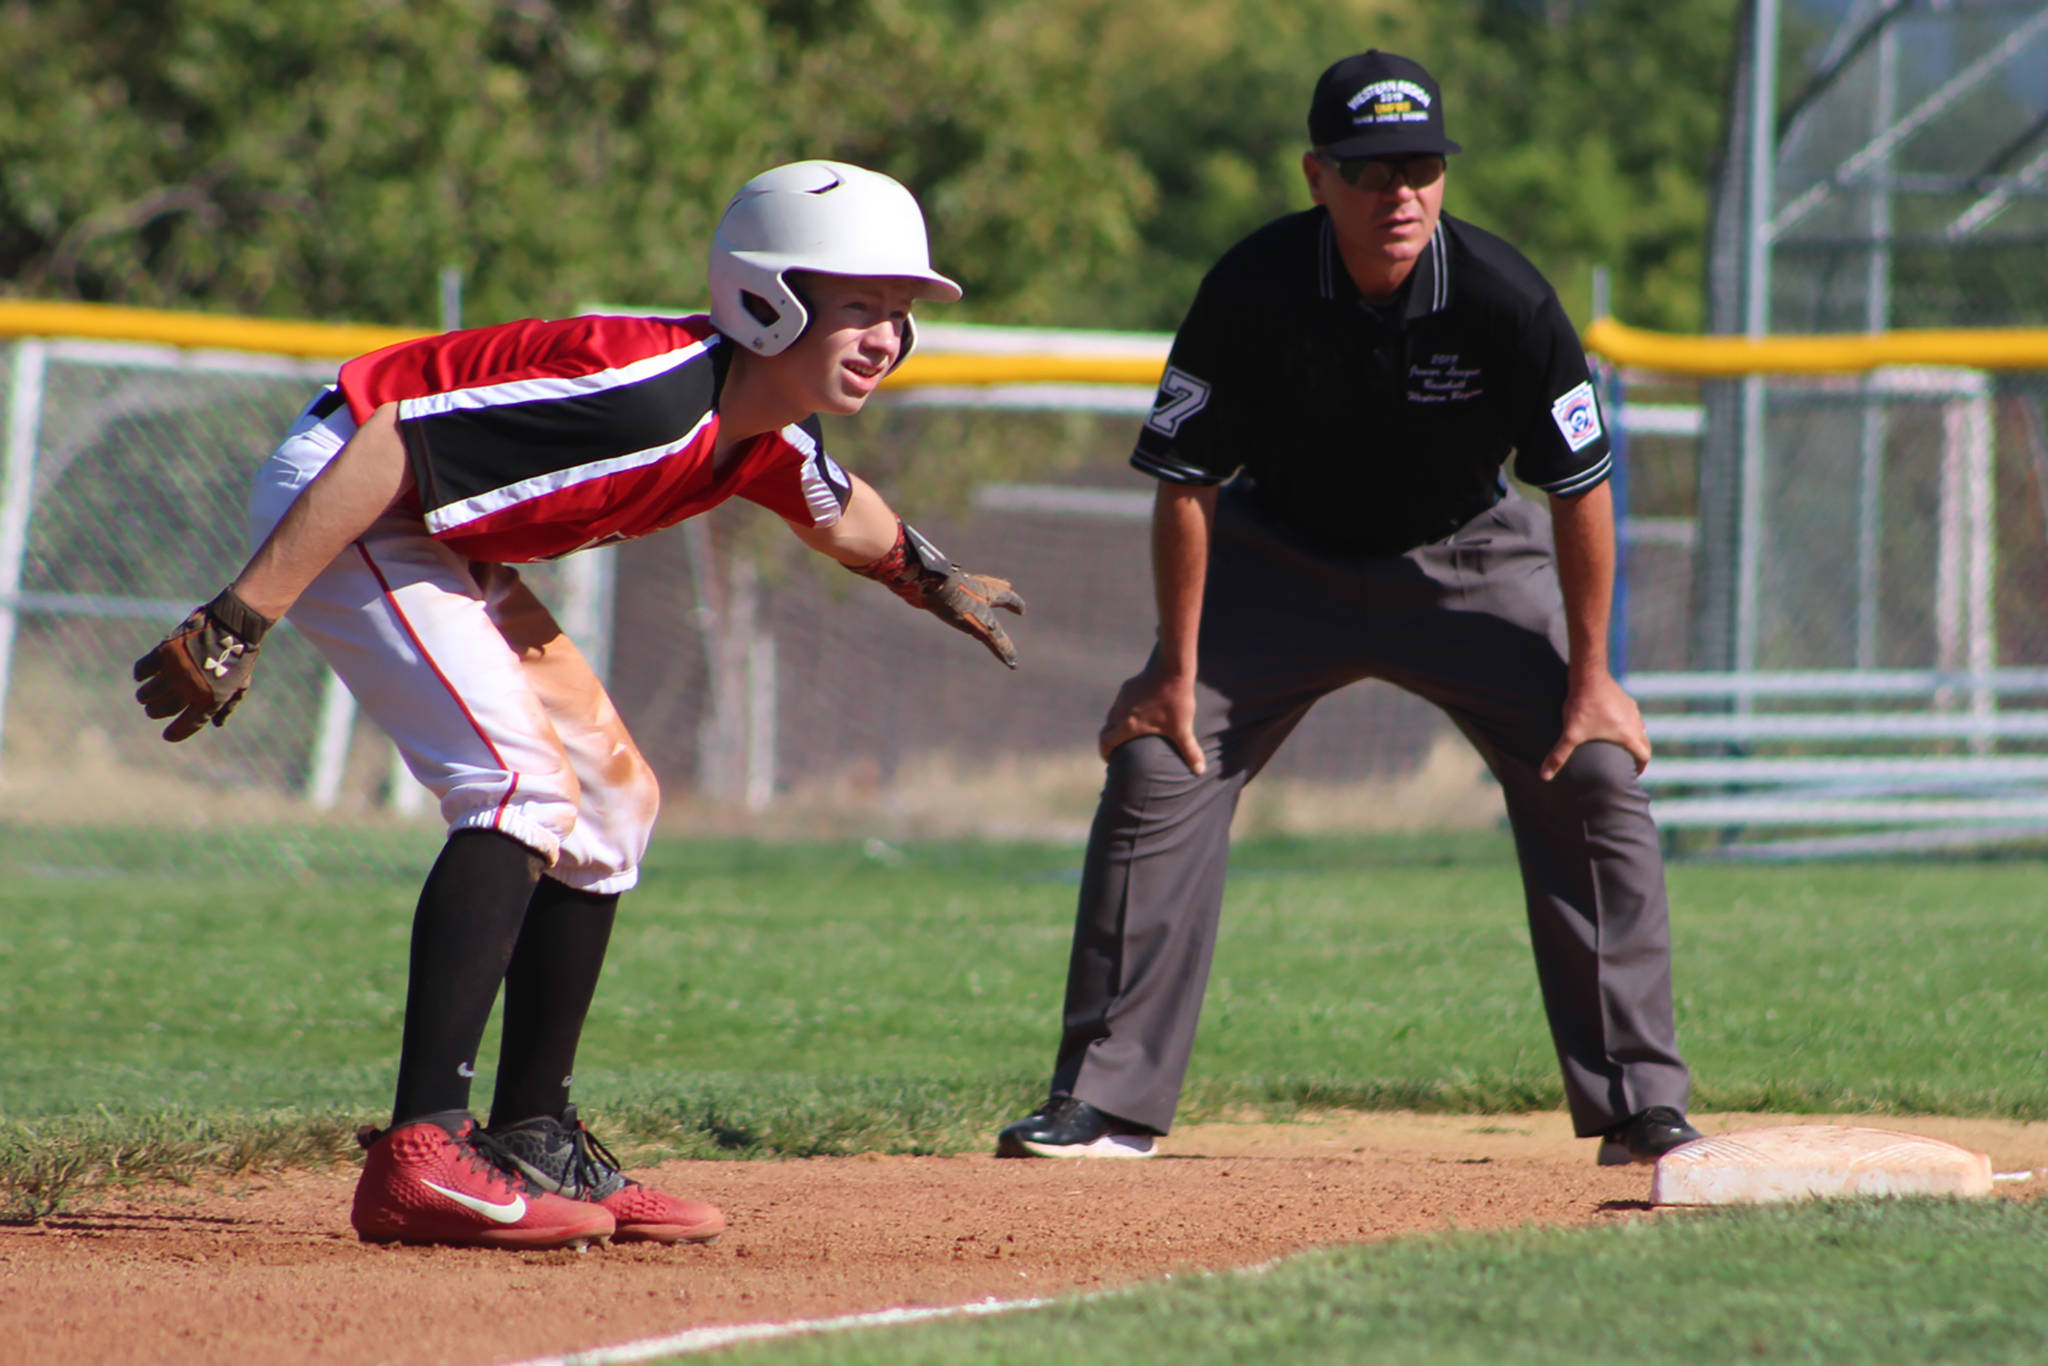 Gastineau Channel Little League Junior All-Star Finn Kesey leads off of third base in a game against tournament host Cambrian Park Little League in the West Regional Tournament at Ida Price Middle School in San Diego, California, on Friday, July 26, 2019. Juneau won 10-3. (Courtesy Photo | Lori Crupi)